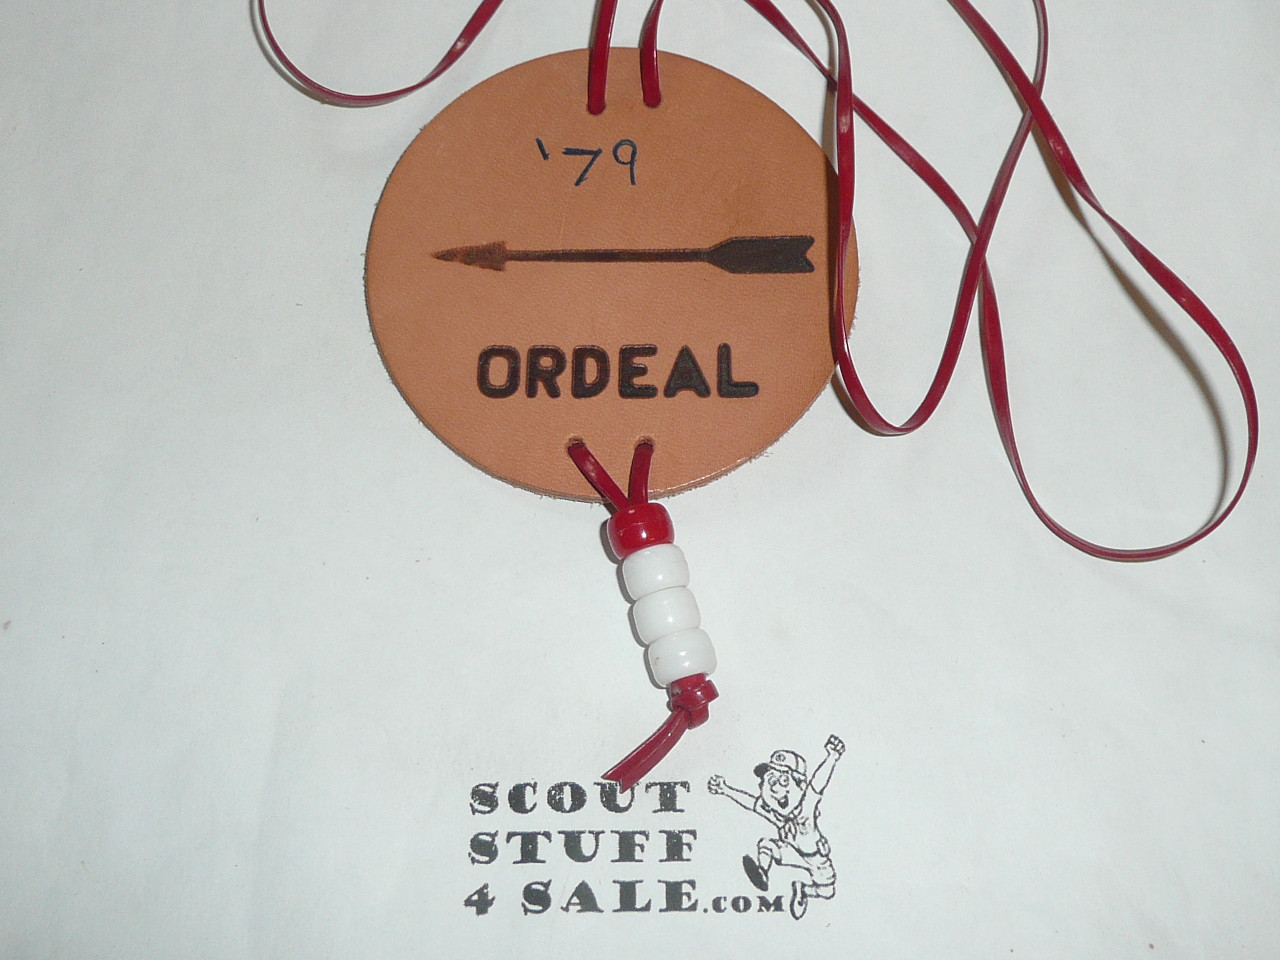 Order of the Arrow Lodge #566 Malibu 1979 Leather Ordeal Medallion - Scout